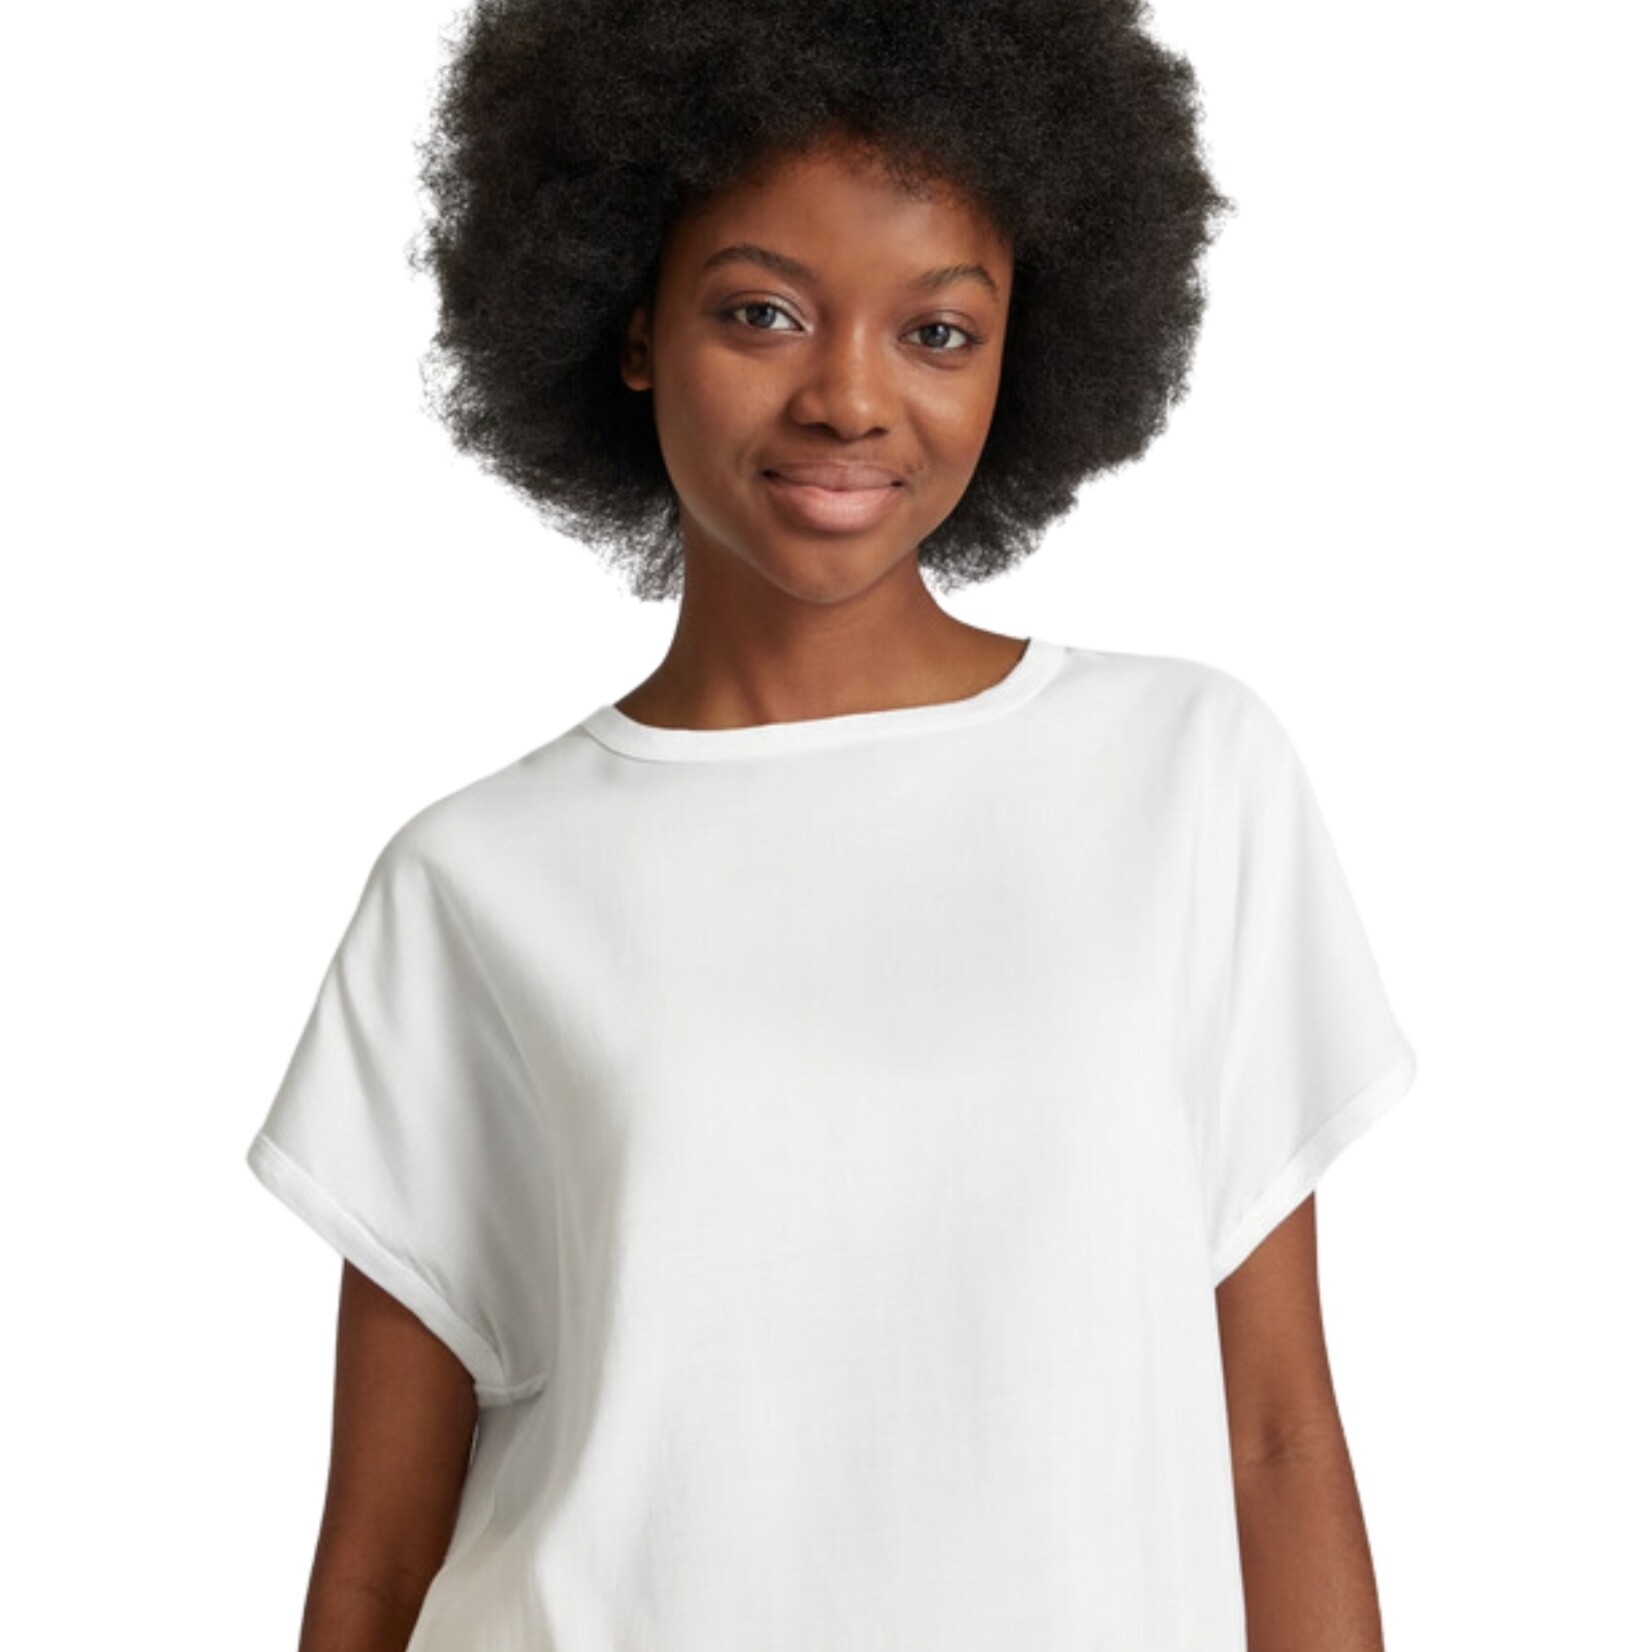 B. Young Tilly T-Shirt - White